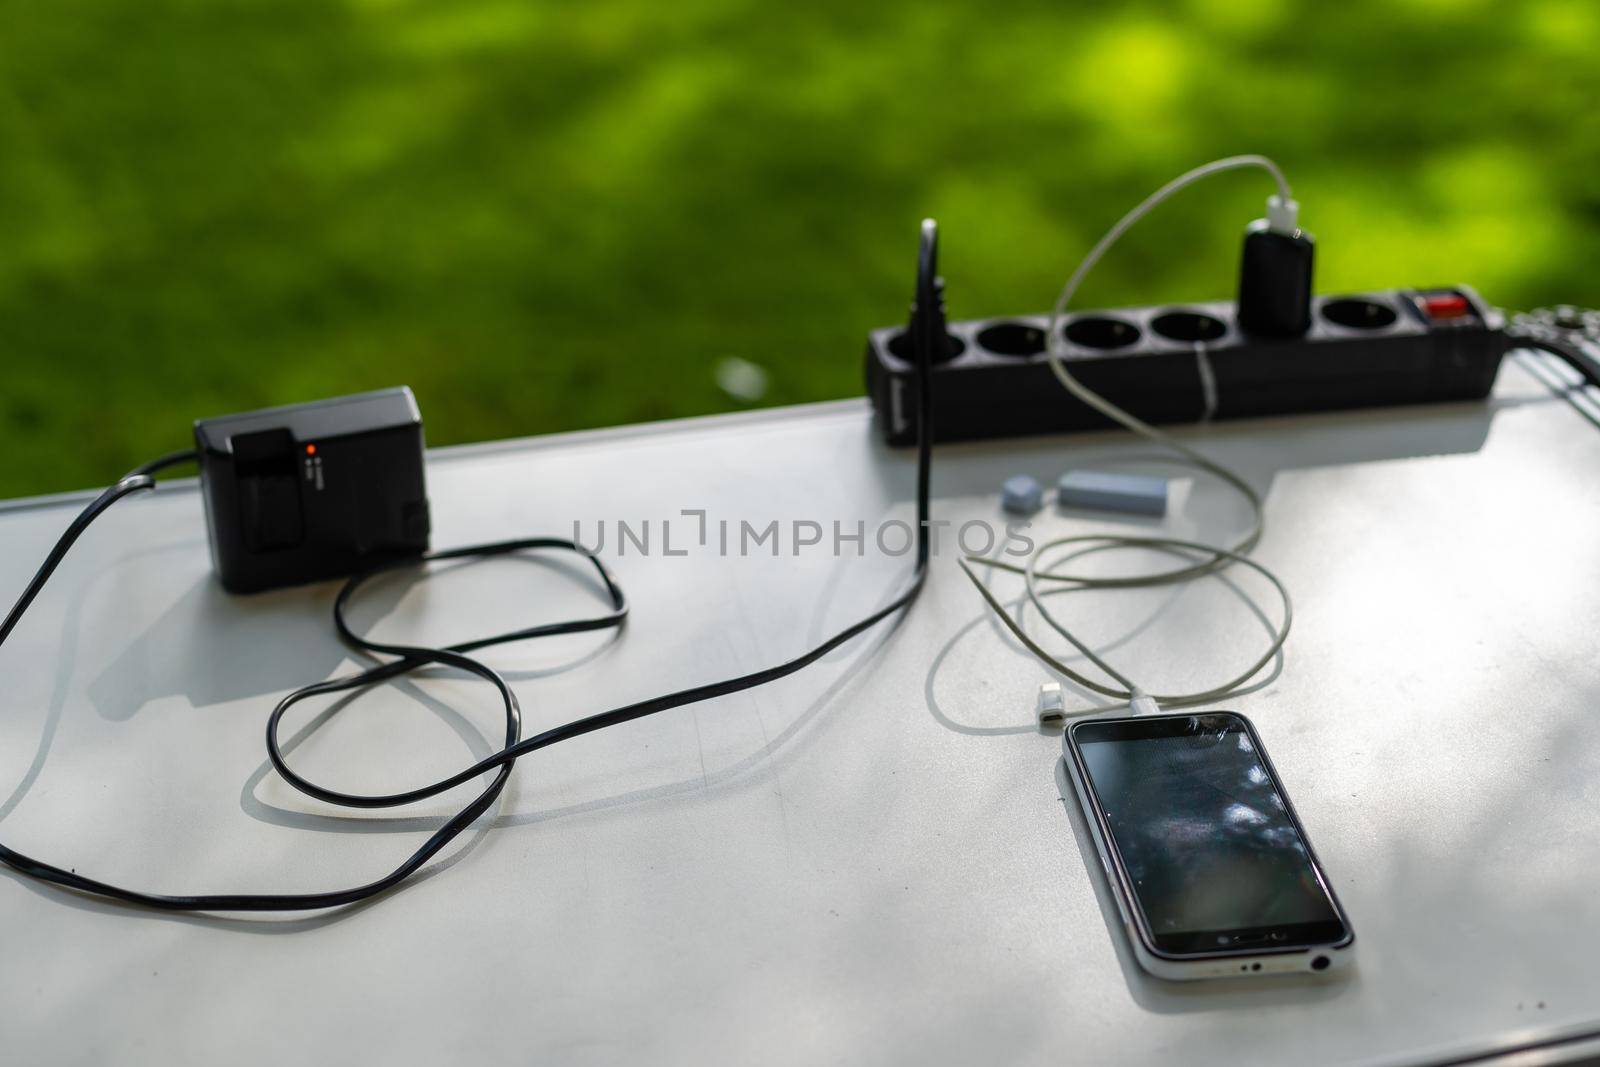 Phone charging with energy bank. Depth of field on Power bank.